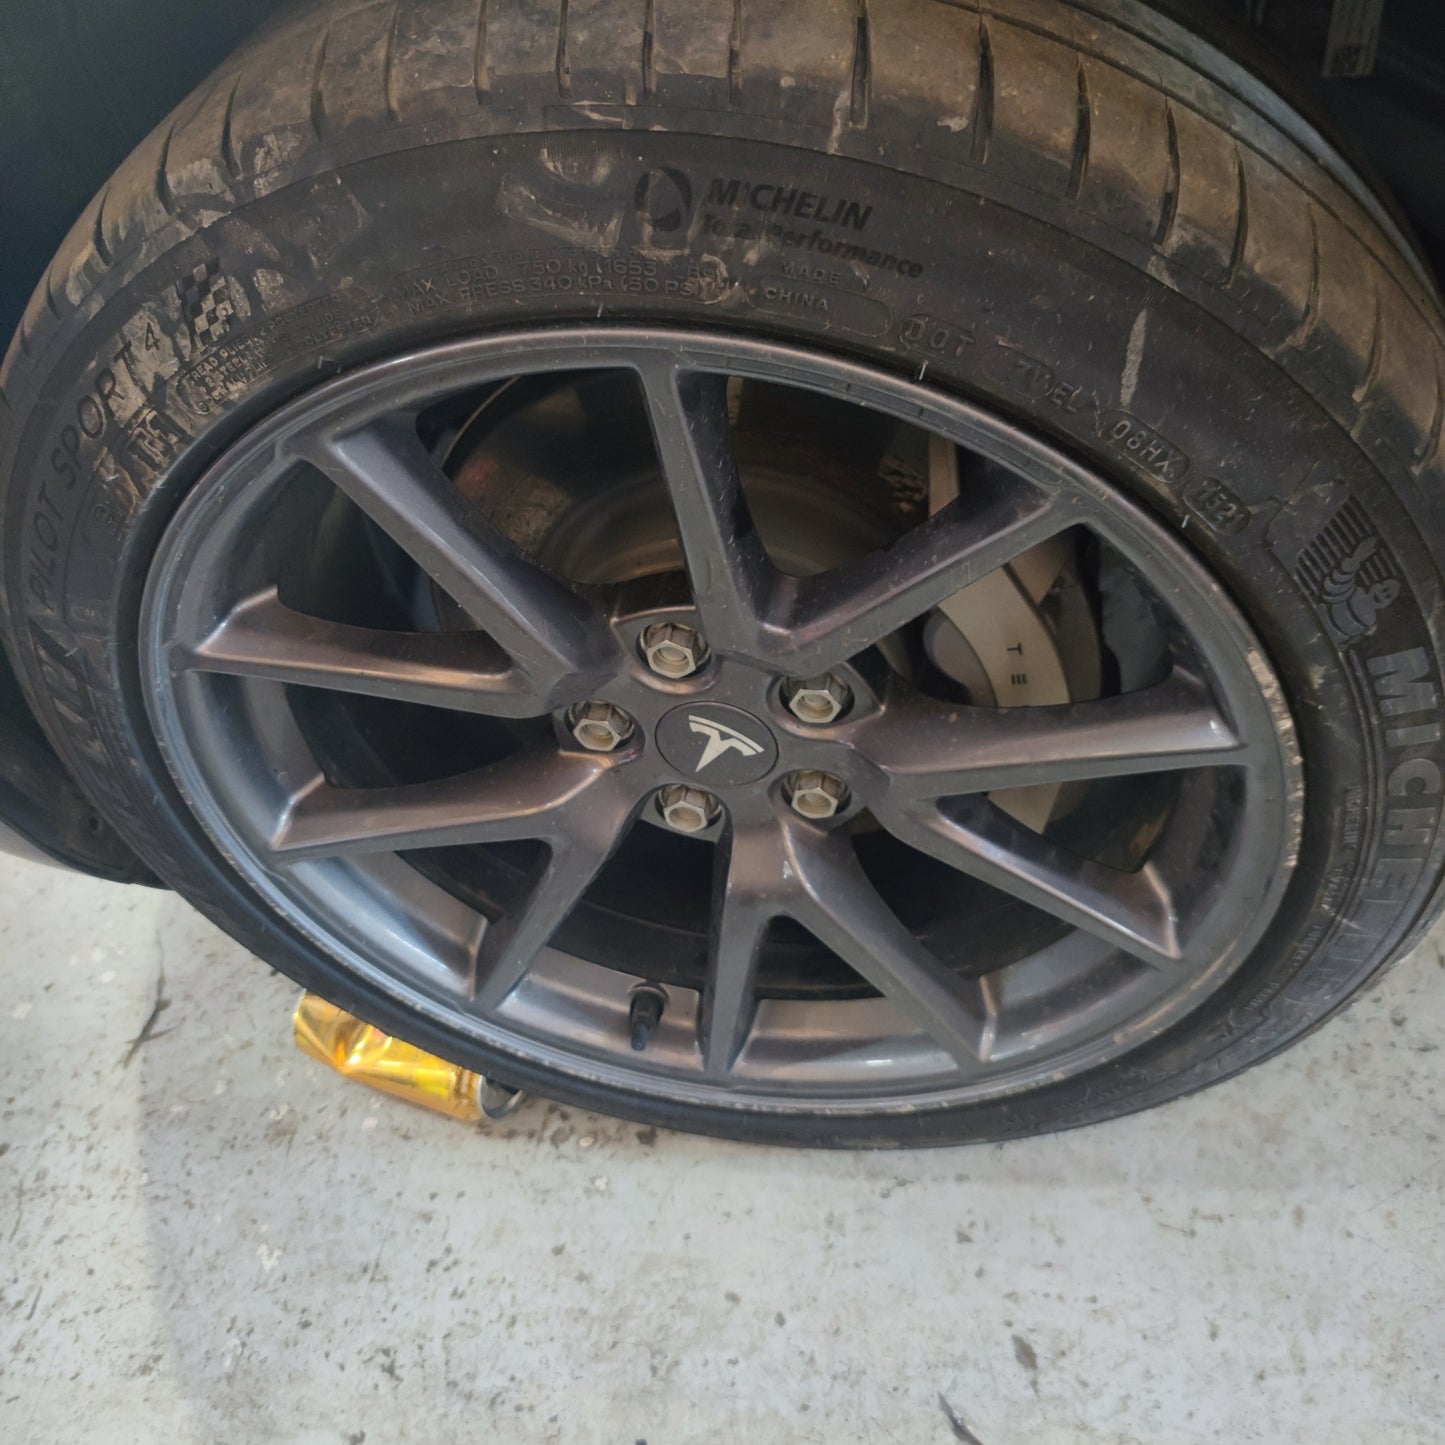 Set of 4 18" Rims and Tyres